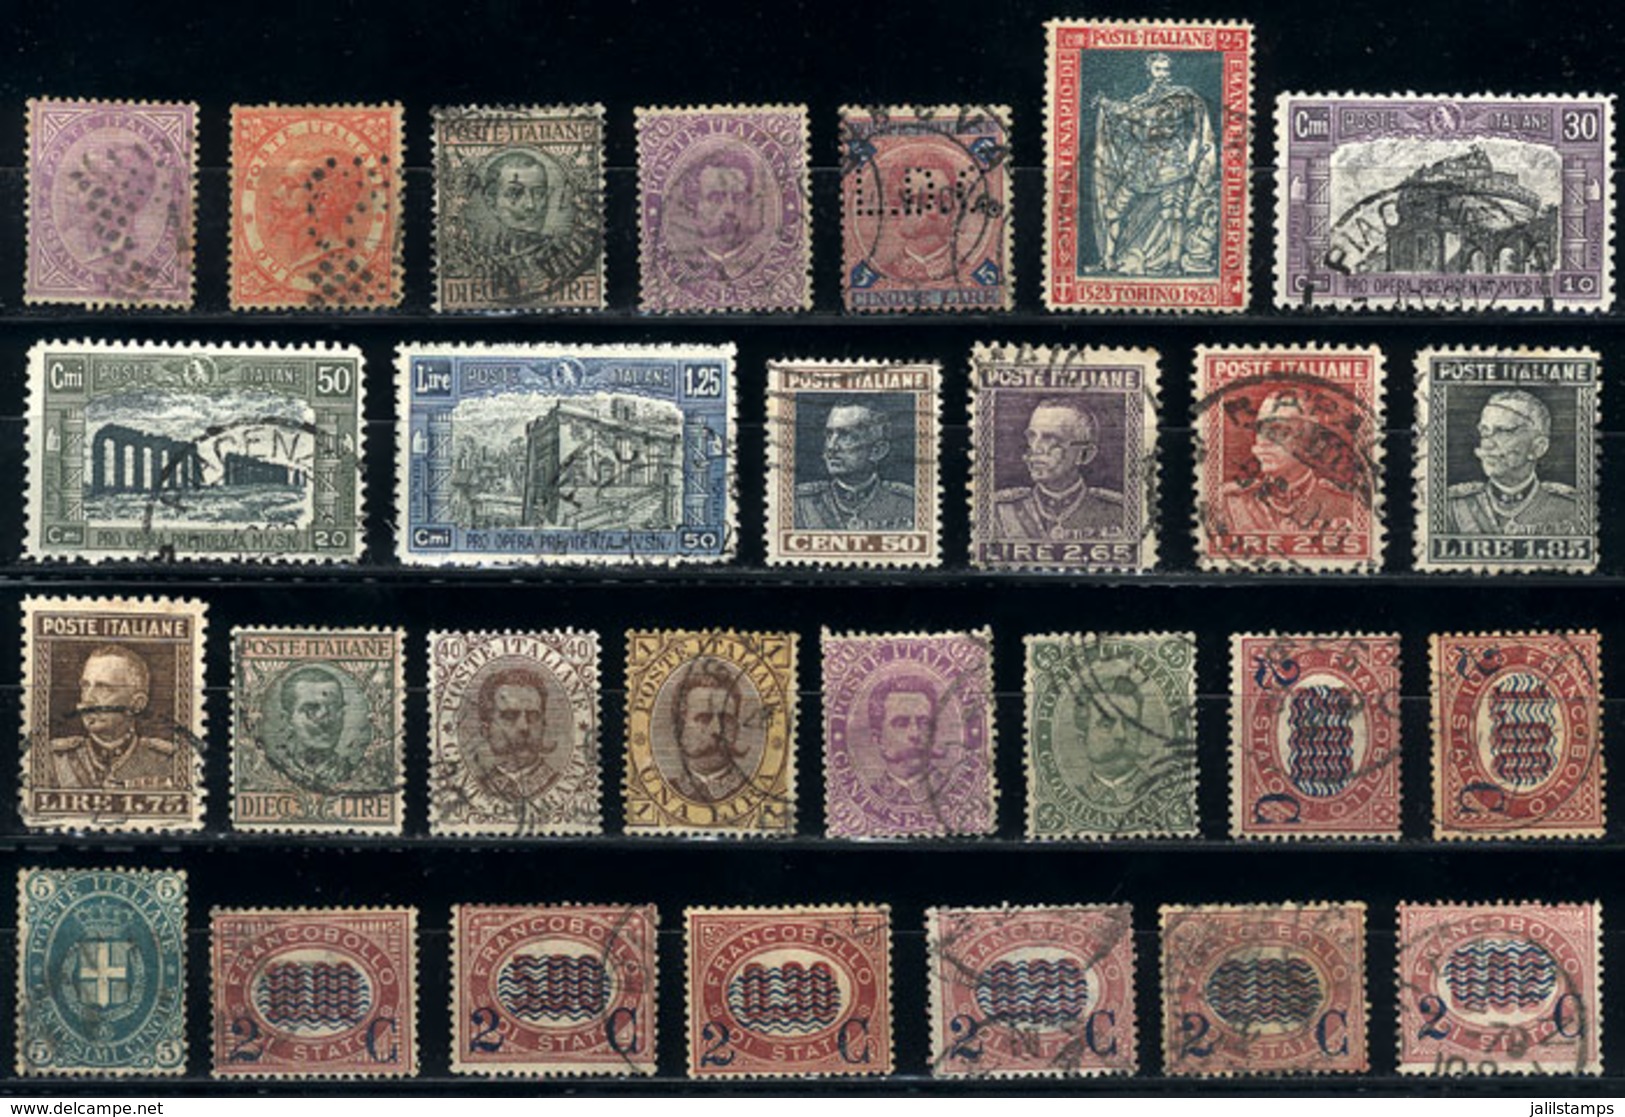 888 ITALY: Interesting Lot Of Old Stamps, Used, Most Of Fine To VF Quality (2 Or 3 With - Unclassified